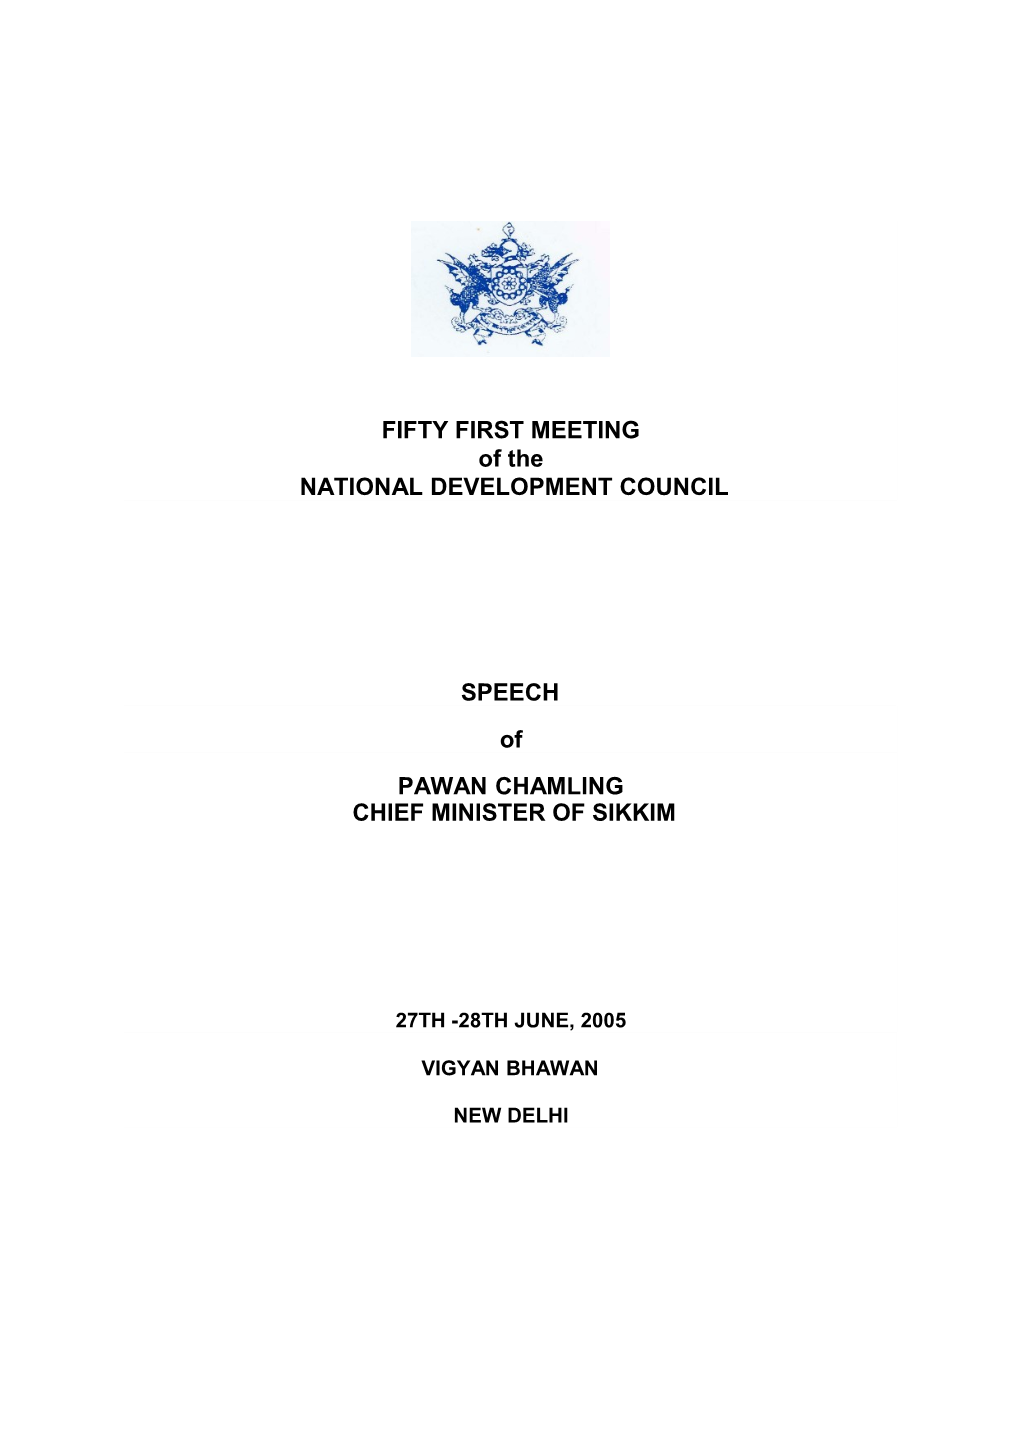 FIFTY FIRST MEETING of the NATIONAL DEVELOPMENT COUNCIL